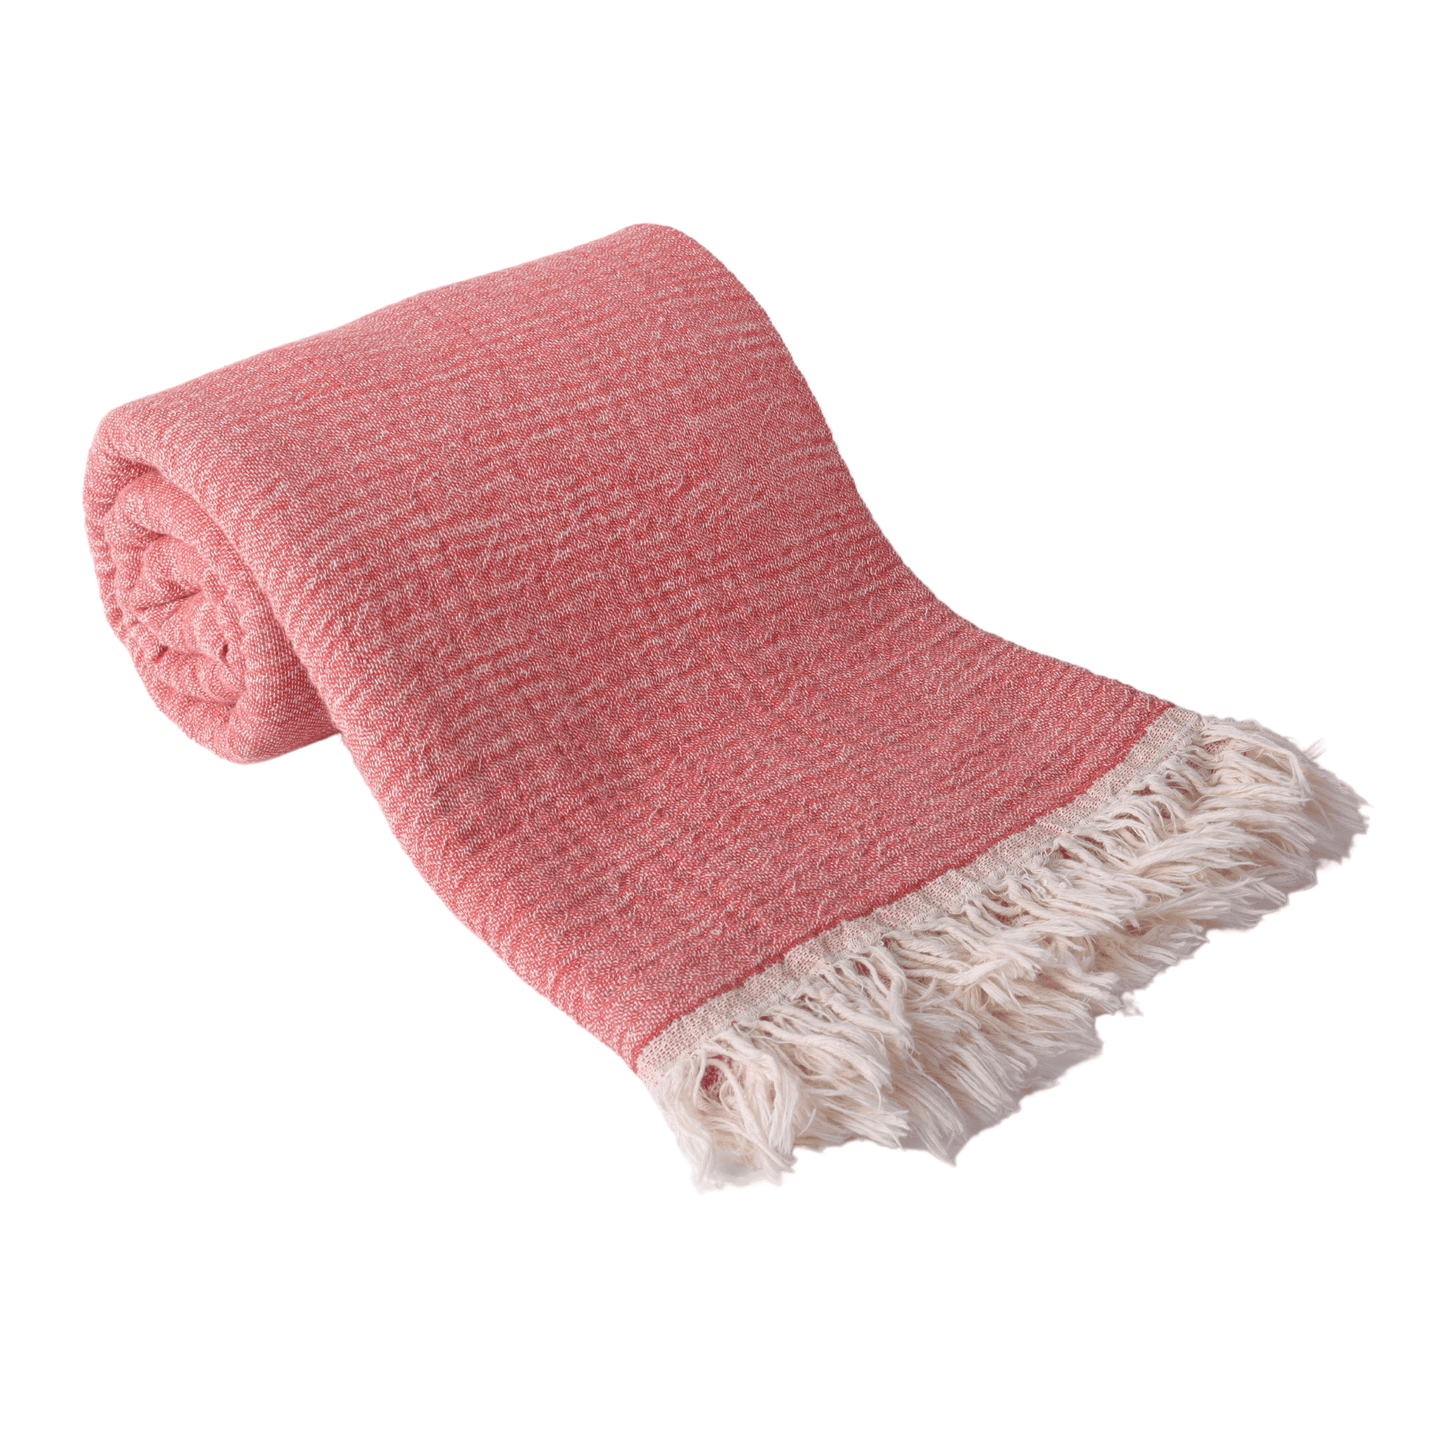 Muslin Towels for Adults rose 3